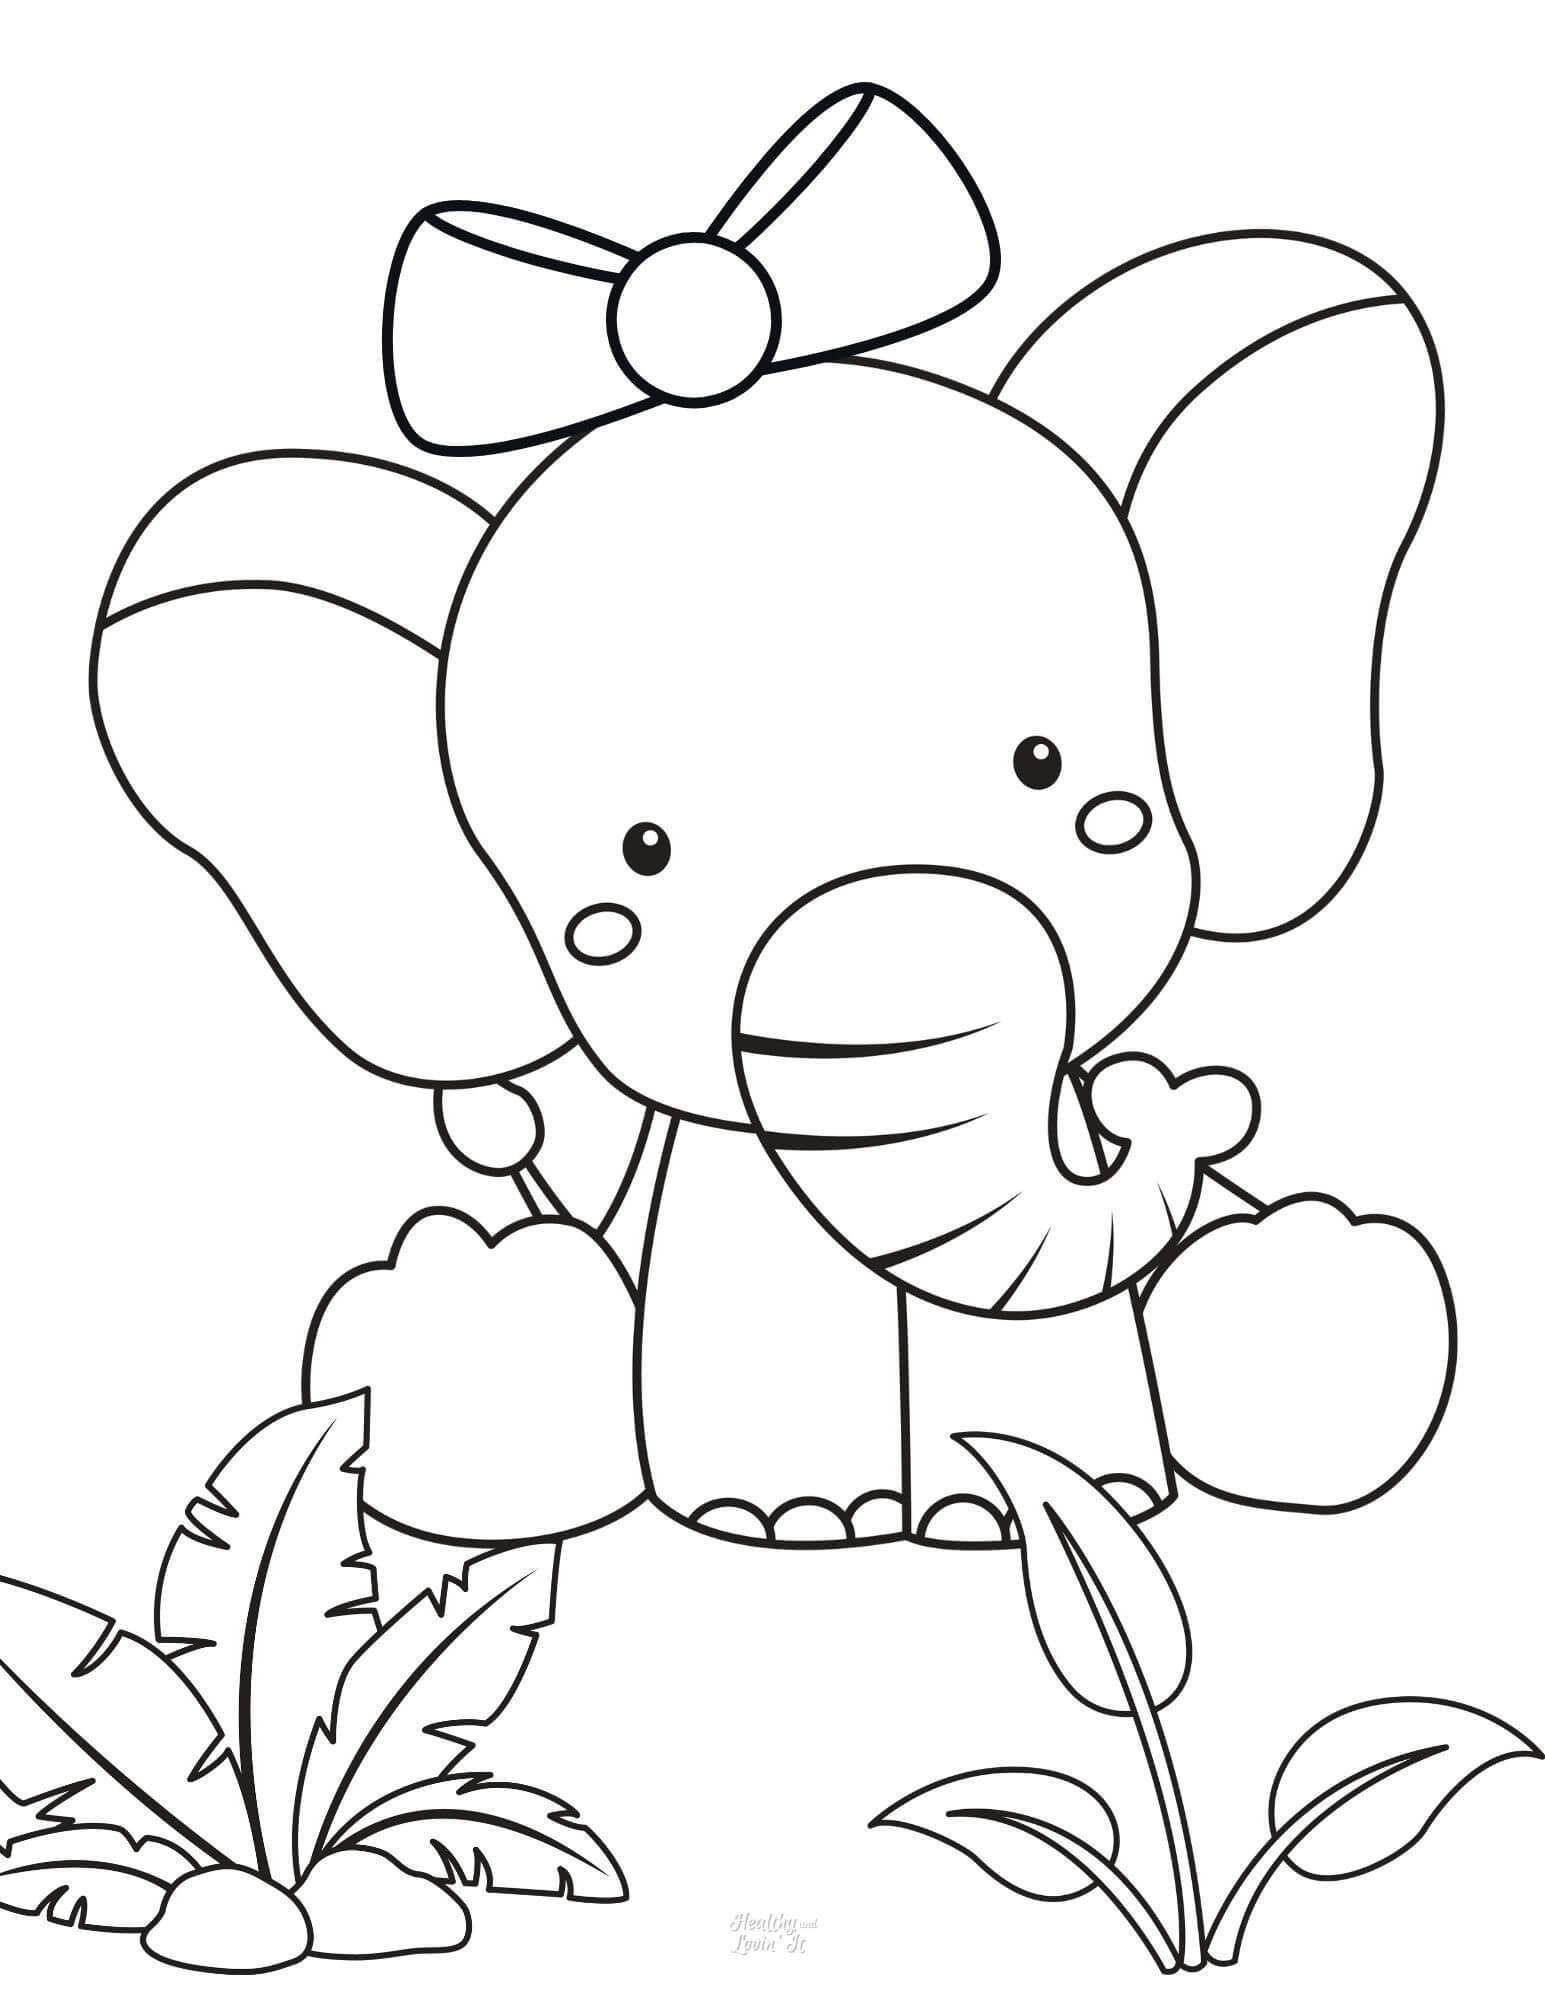 20+ Baby Elephant Coloring Pages For You